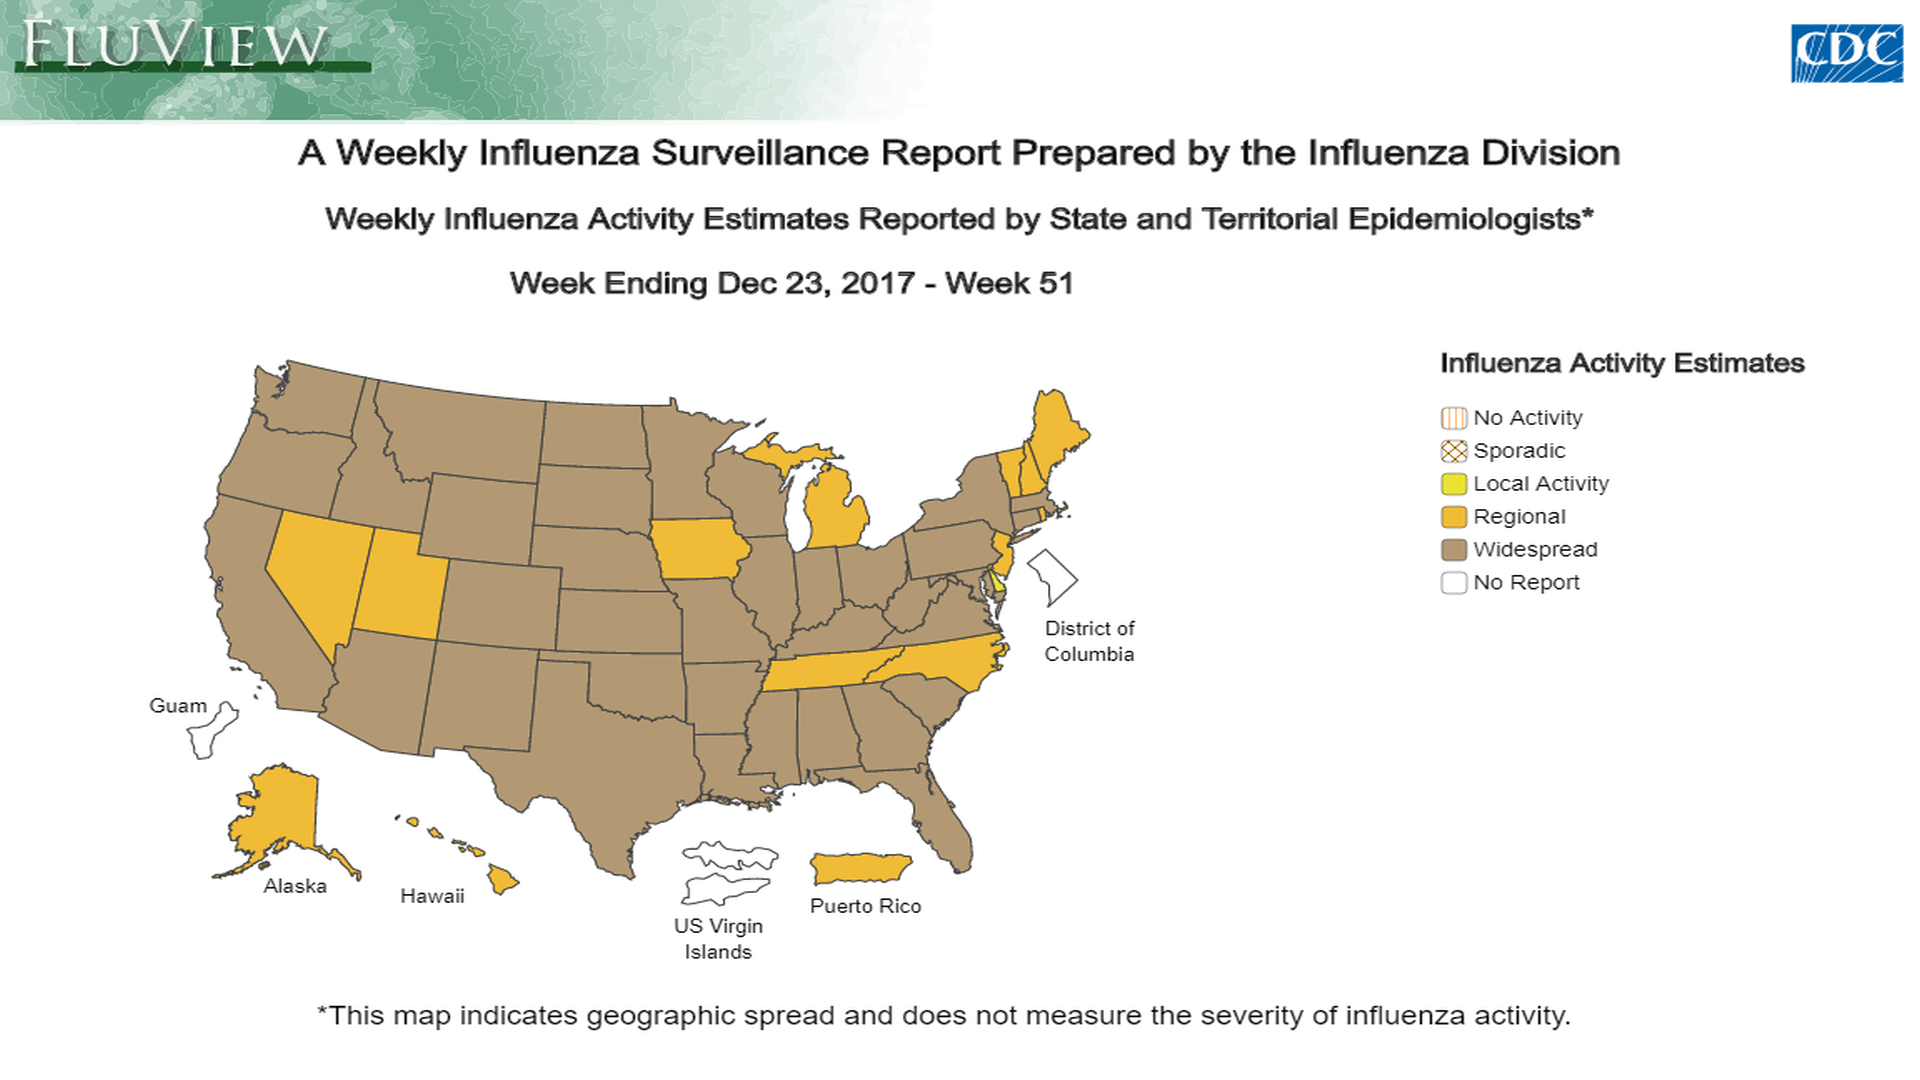 CDC Flu Update: Number of States Reporting Widespread Flu Activity Jumps to 36